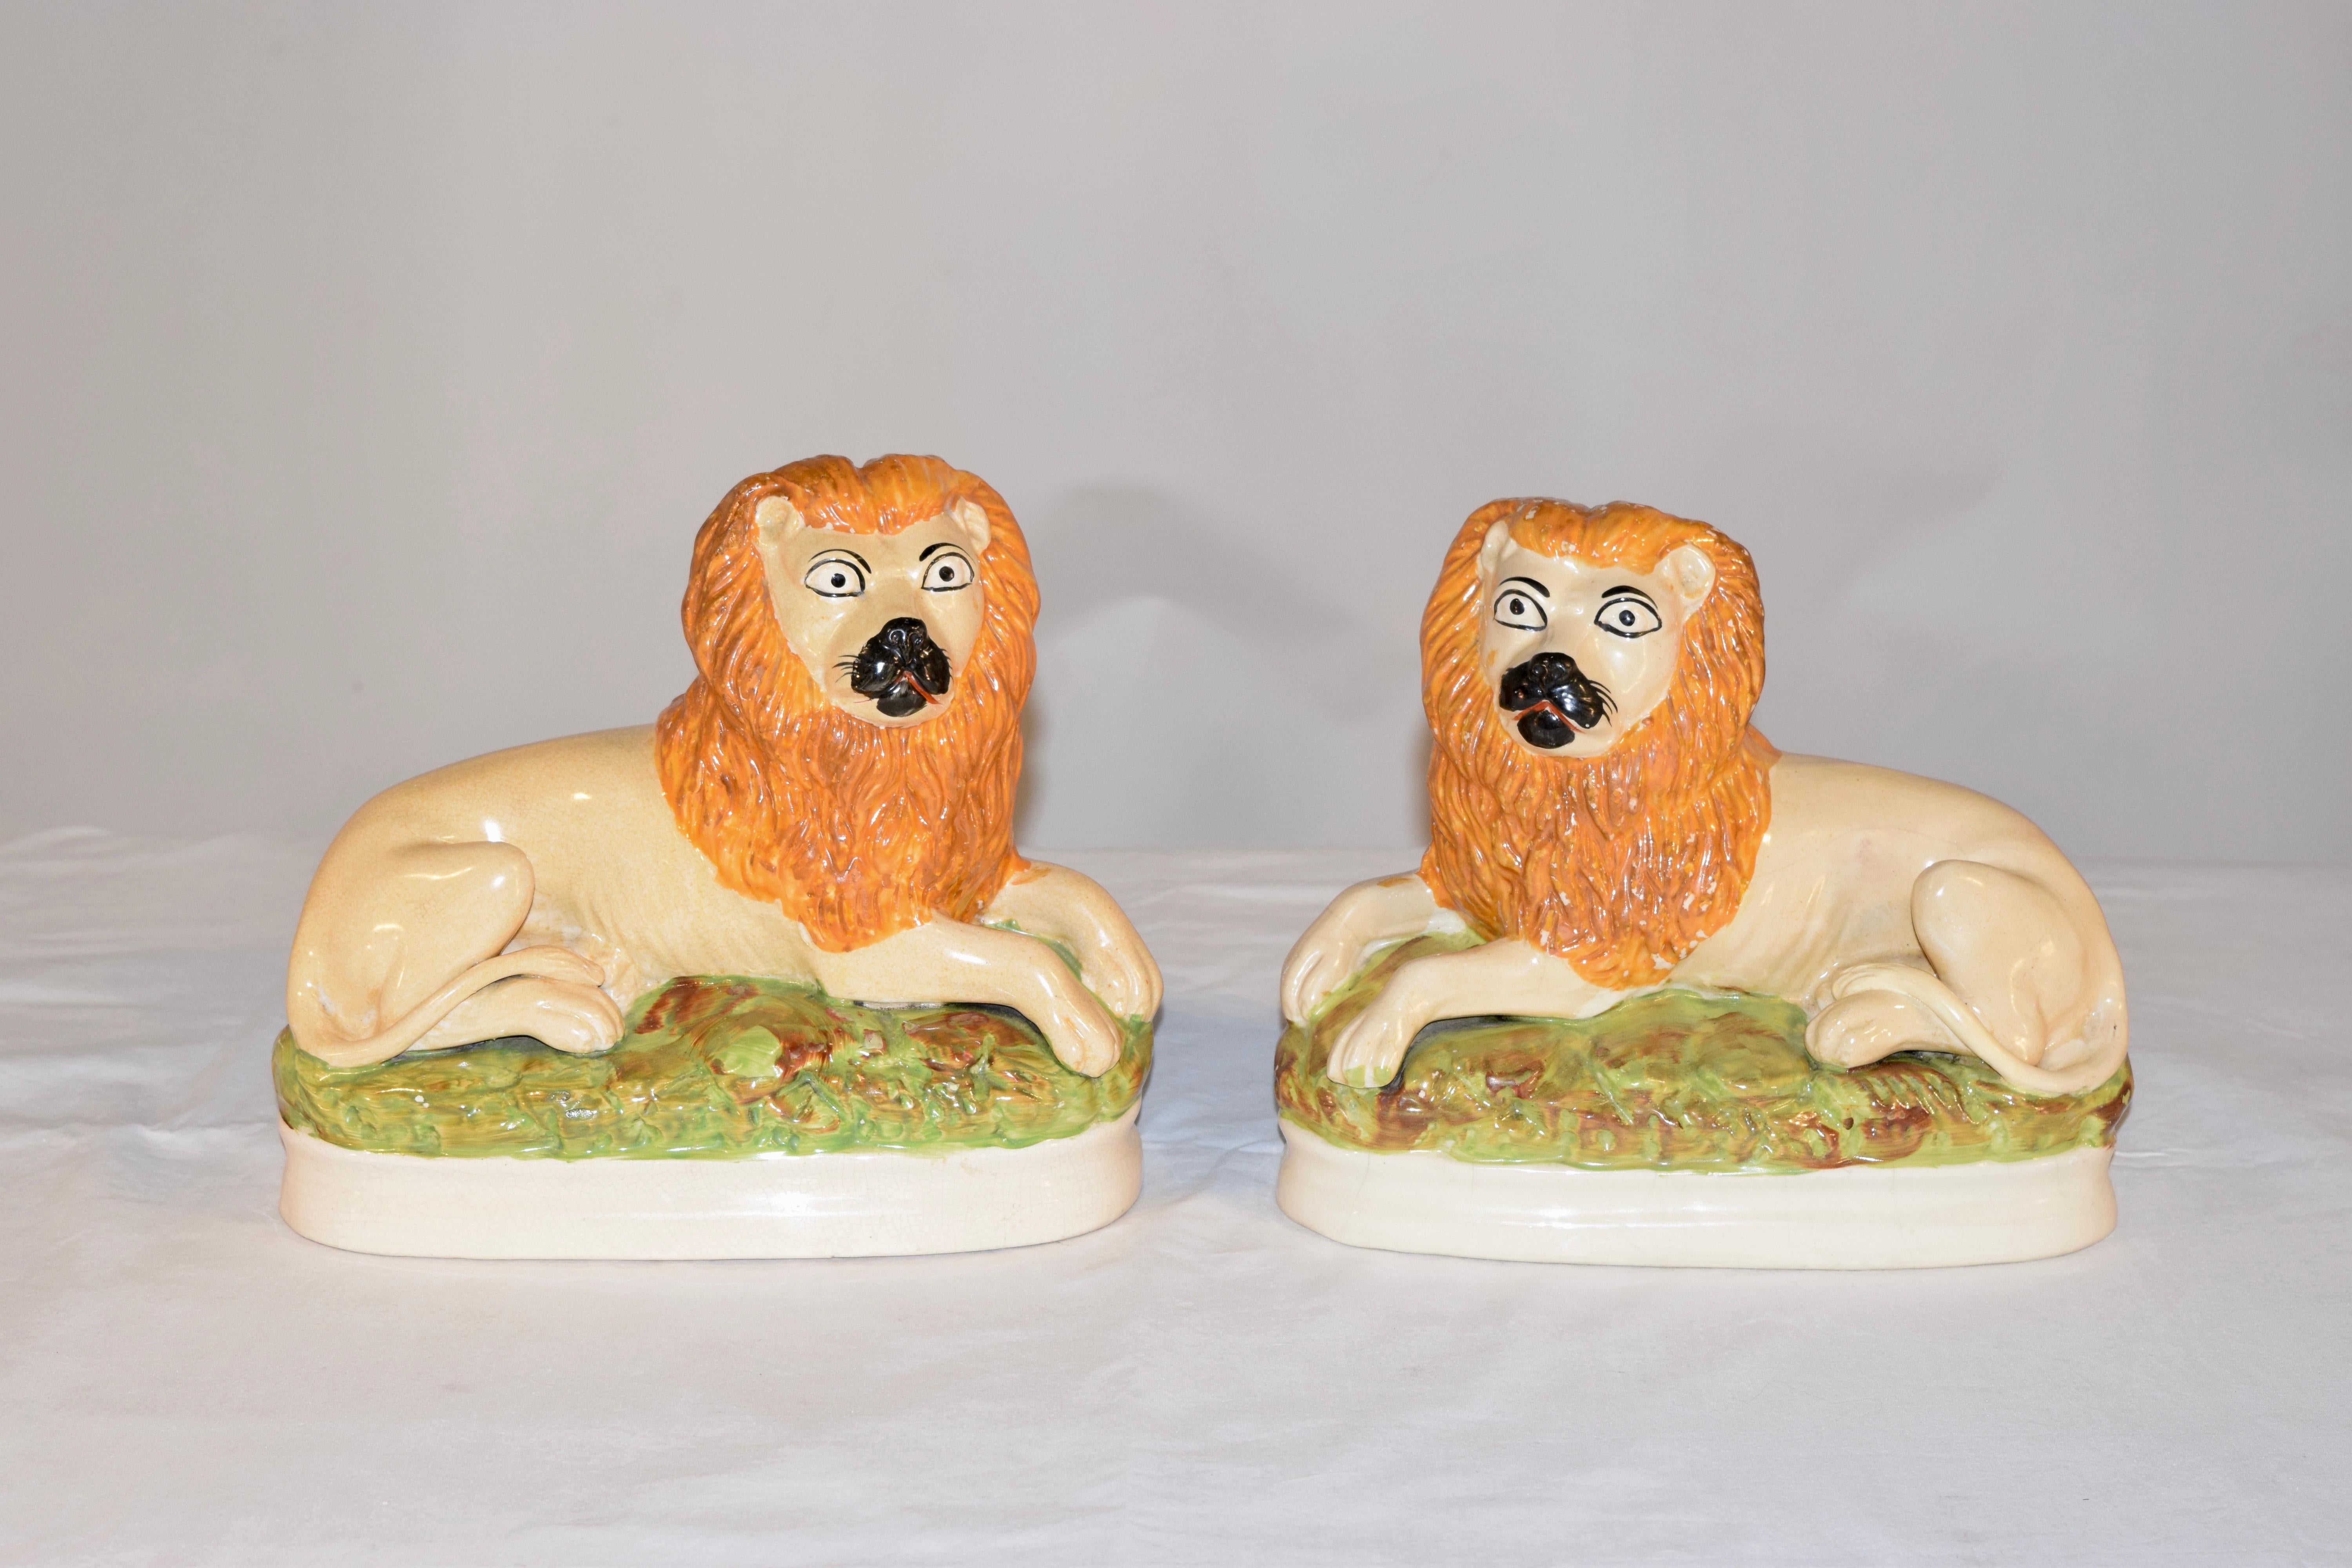 Pair of rare Staffordshire lion figures from England. The figures are lying lions on beds of grass, with their tails curling back around their bodies. The figures are richly hand painted in vibrant colors, which make them very unusual and